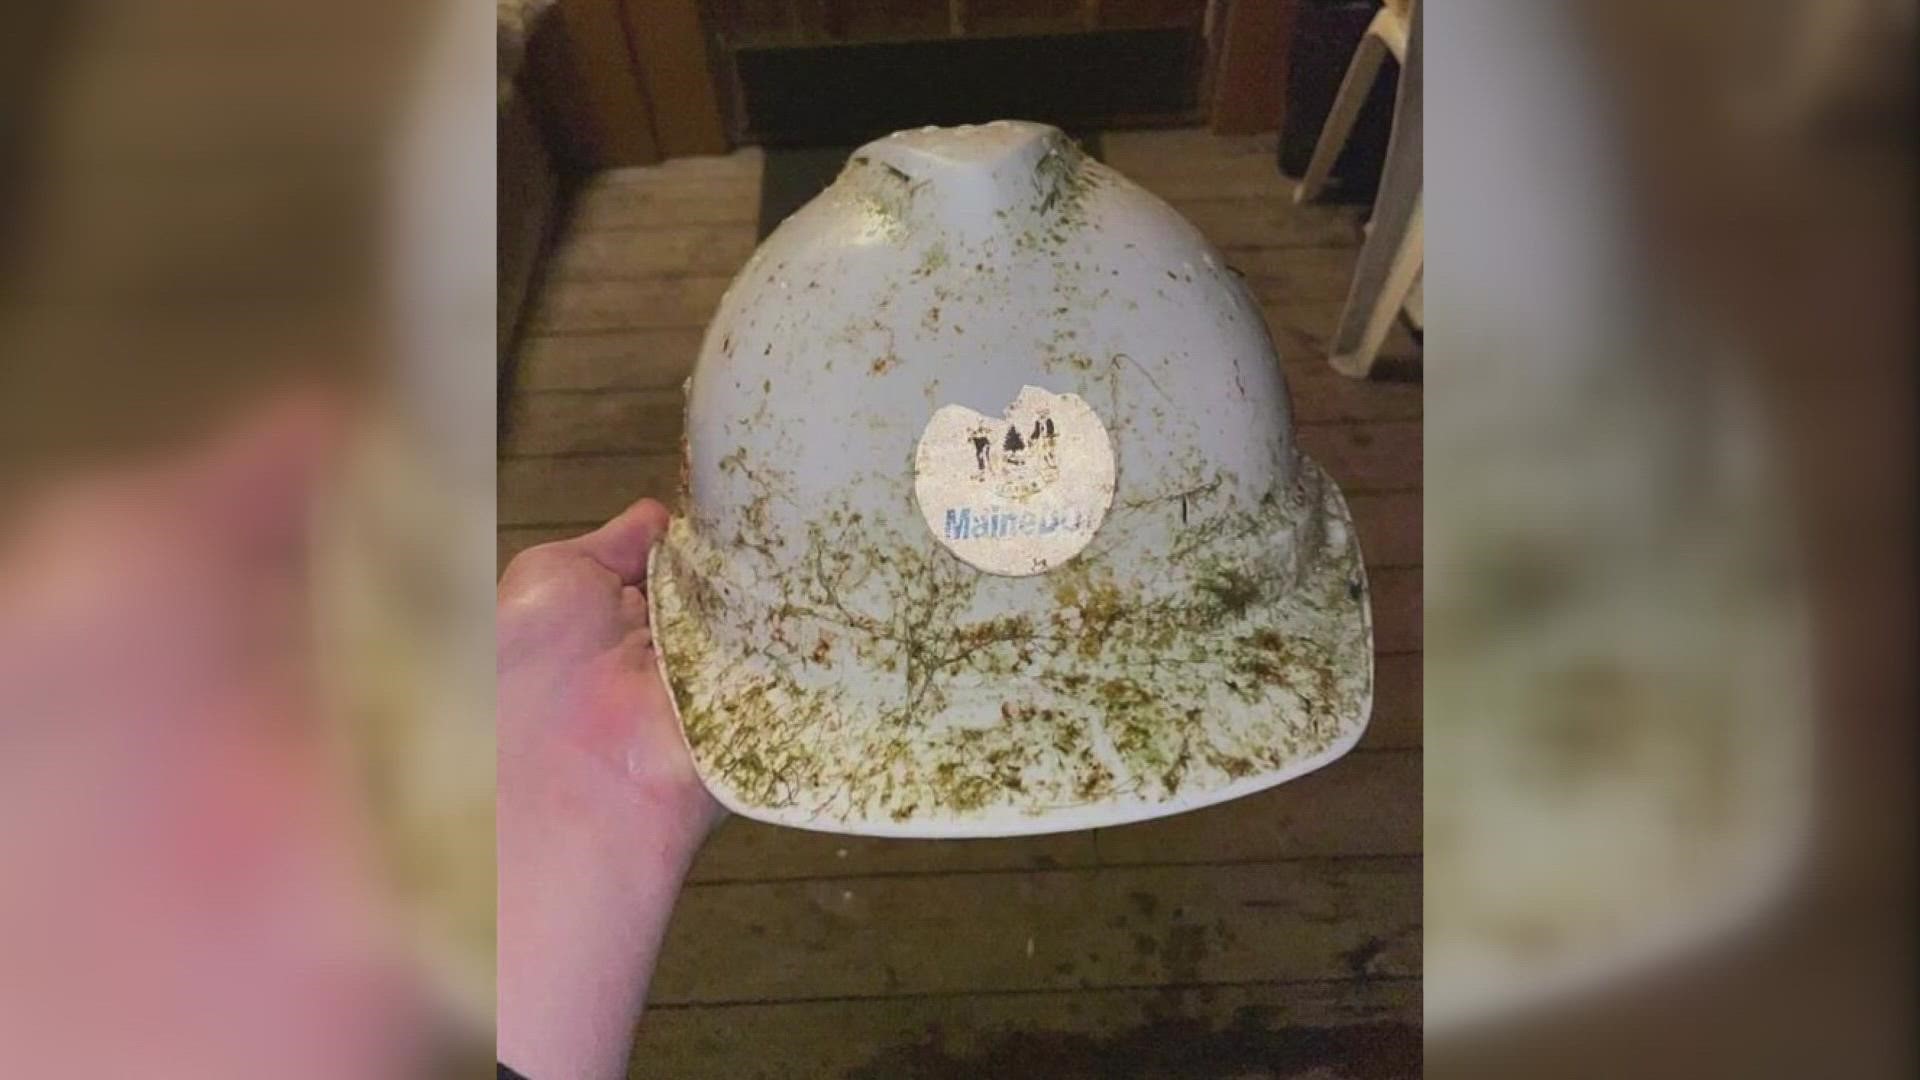 Thousands of miles from Maine's coastline, a man was walking along the shore in Norway where he found a hard hat on a bed of seaweed.